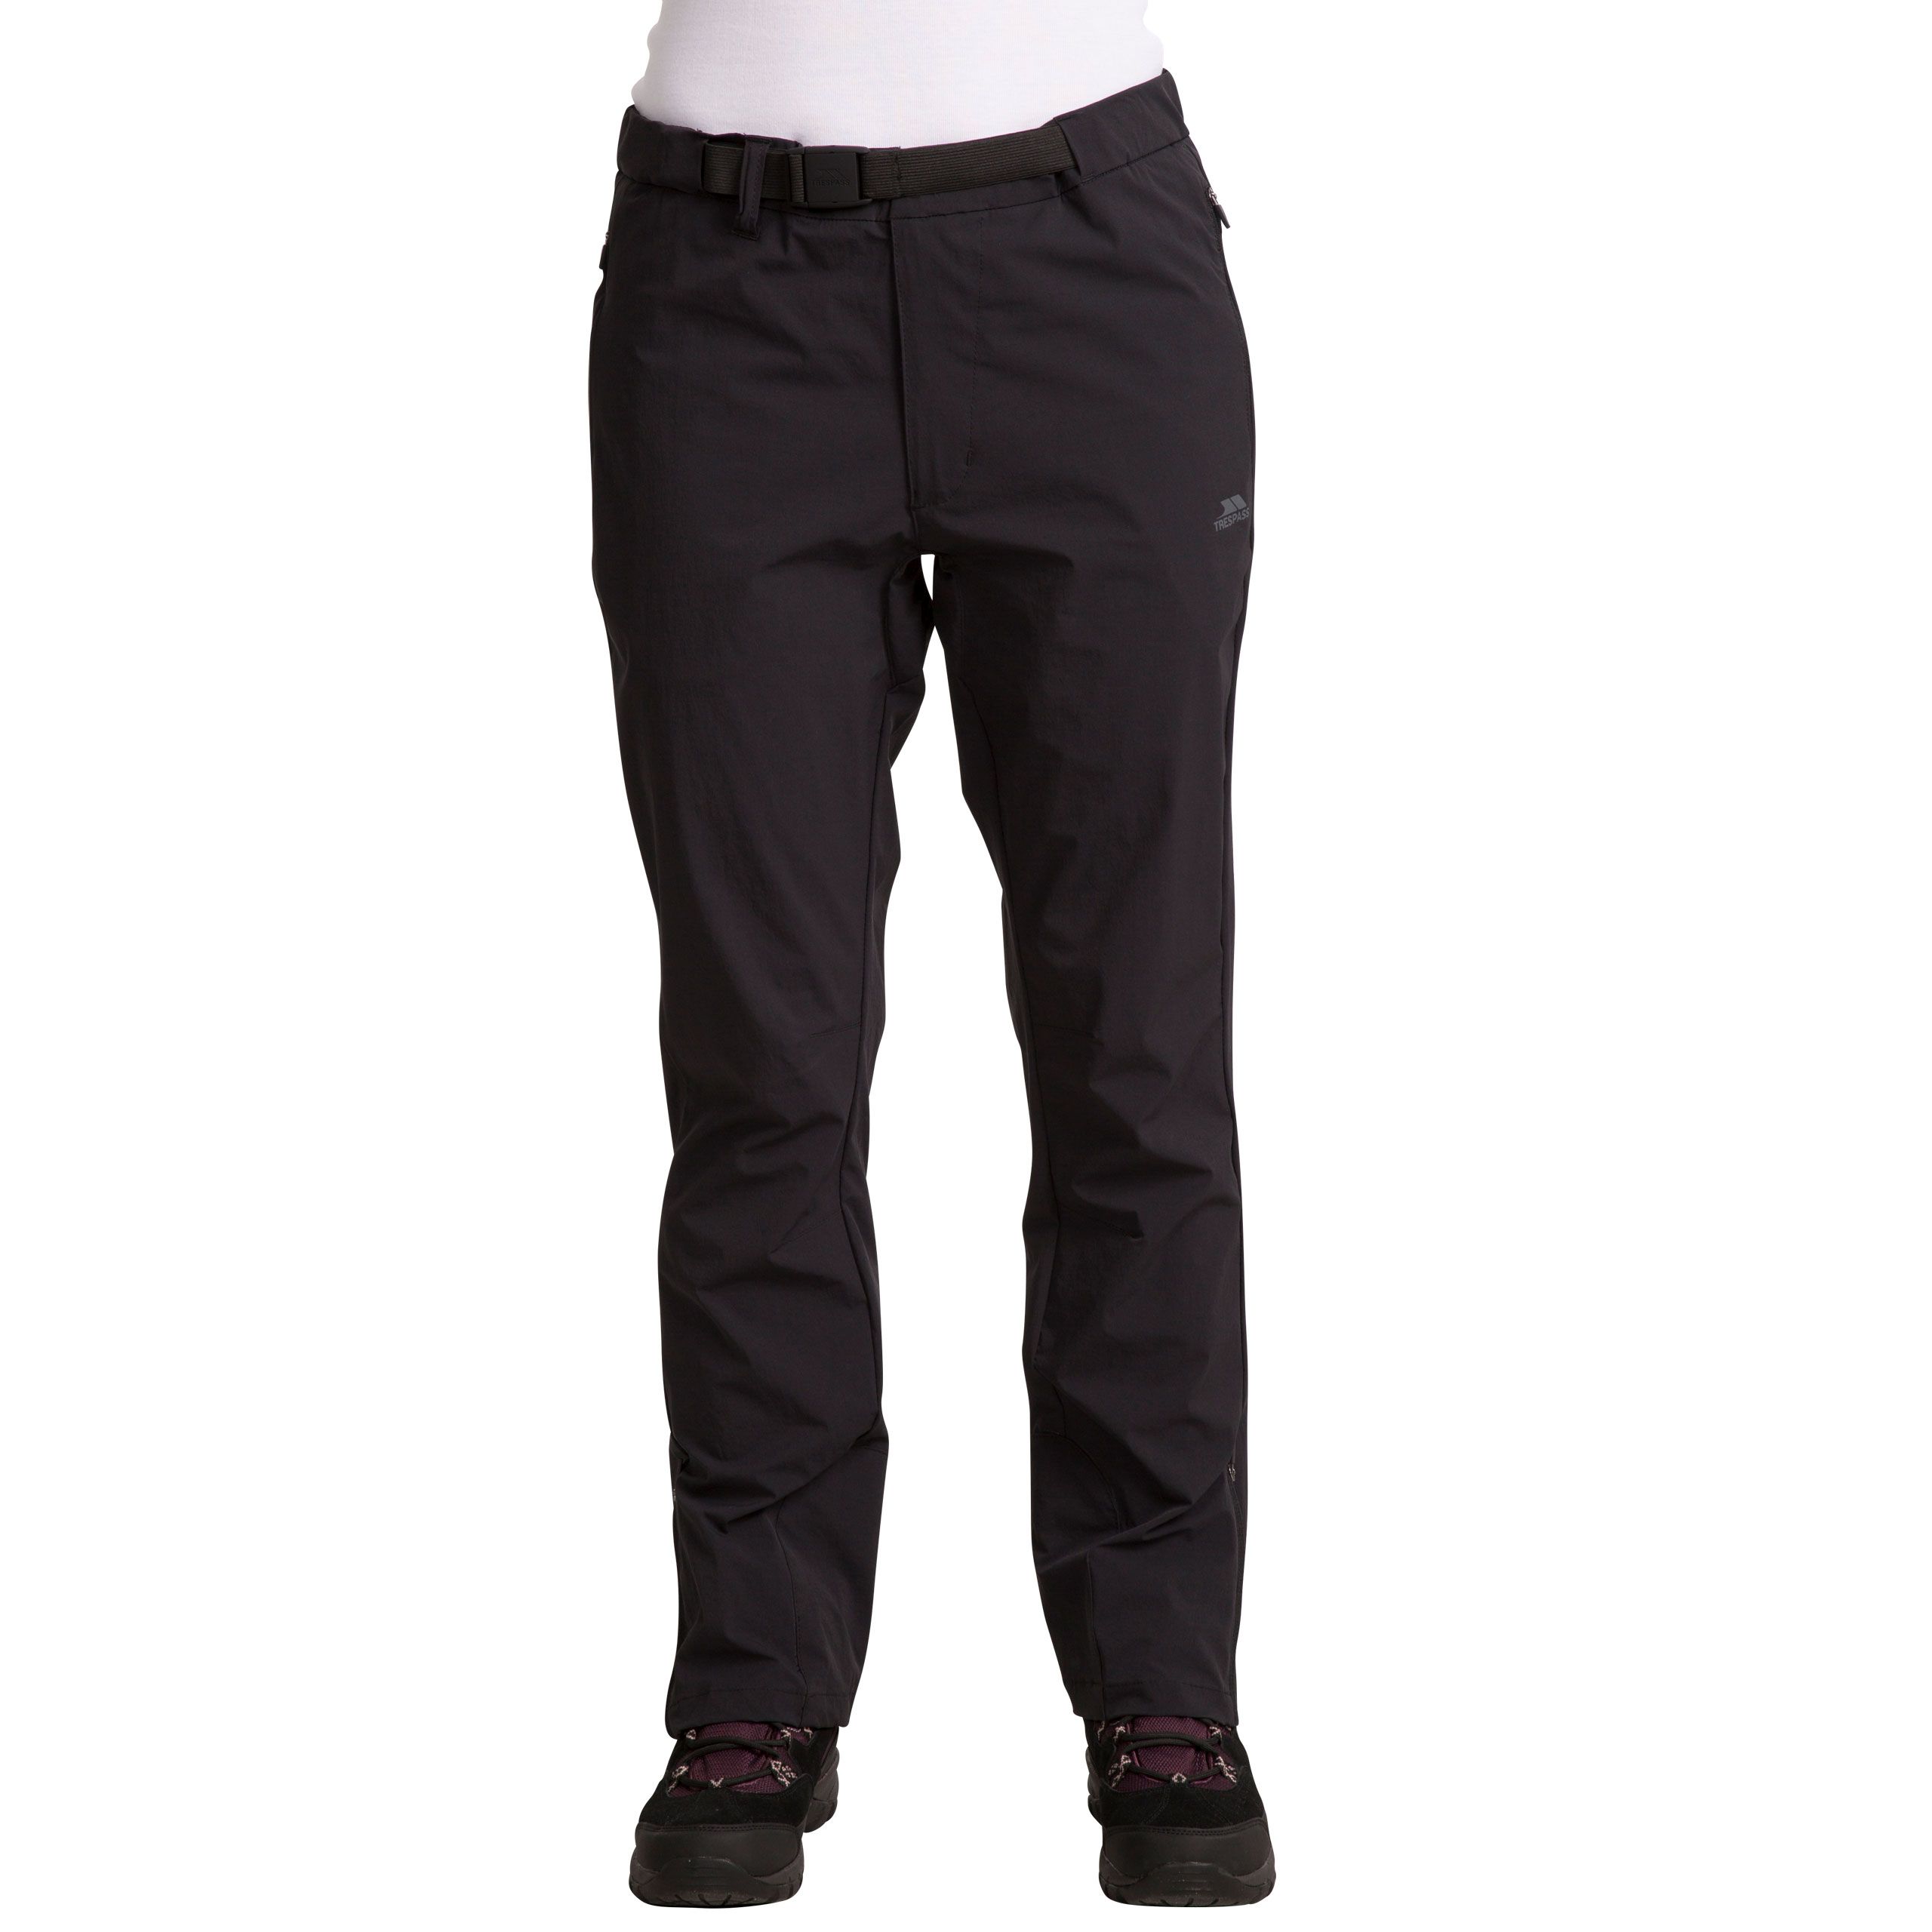 Stormlight Womens Quick Dry Walking Trousers